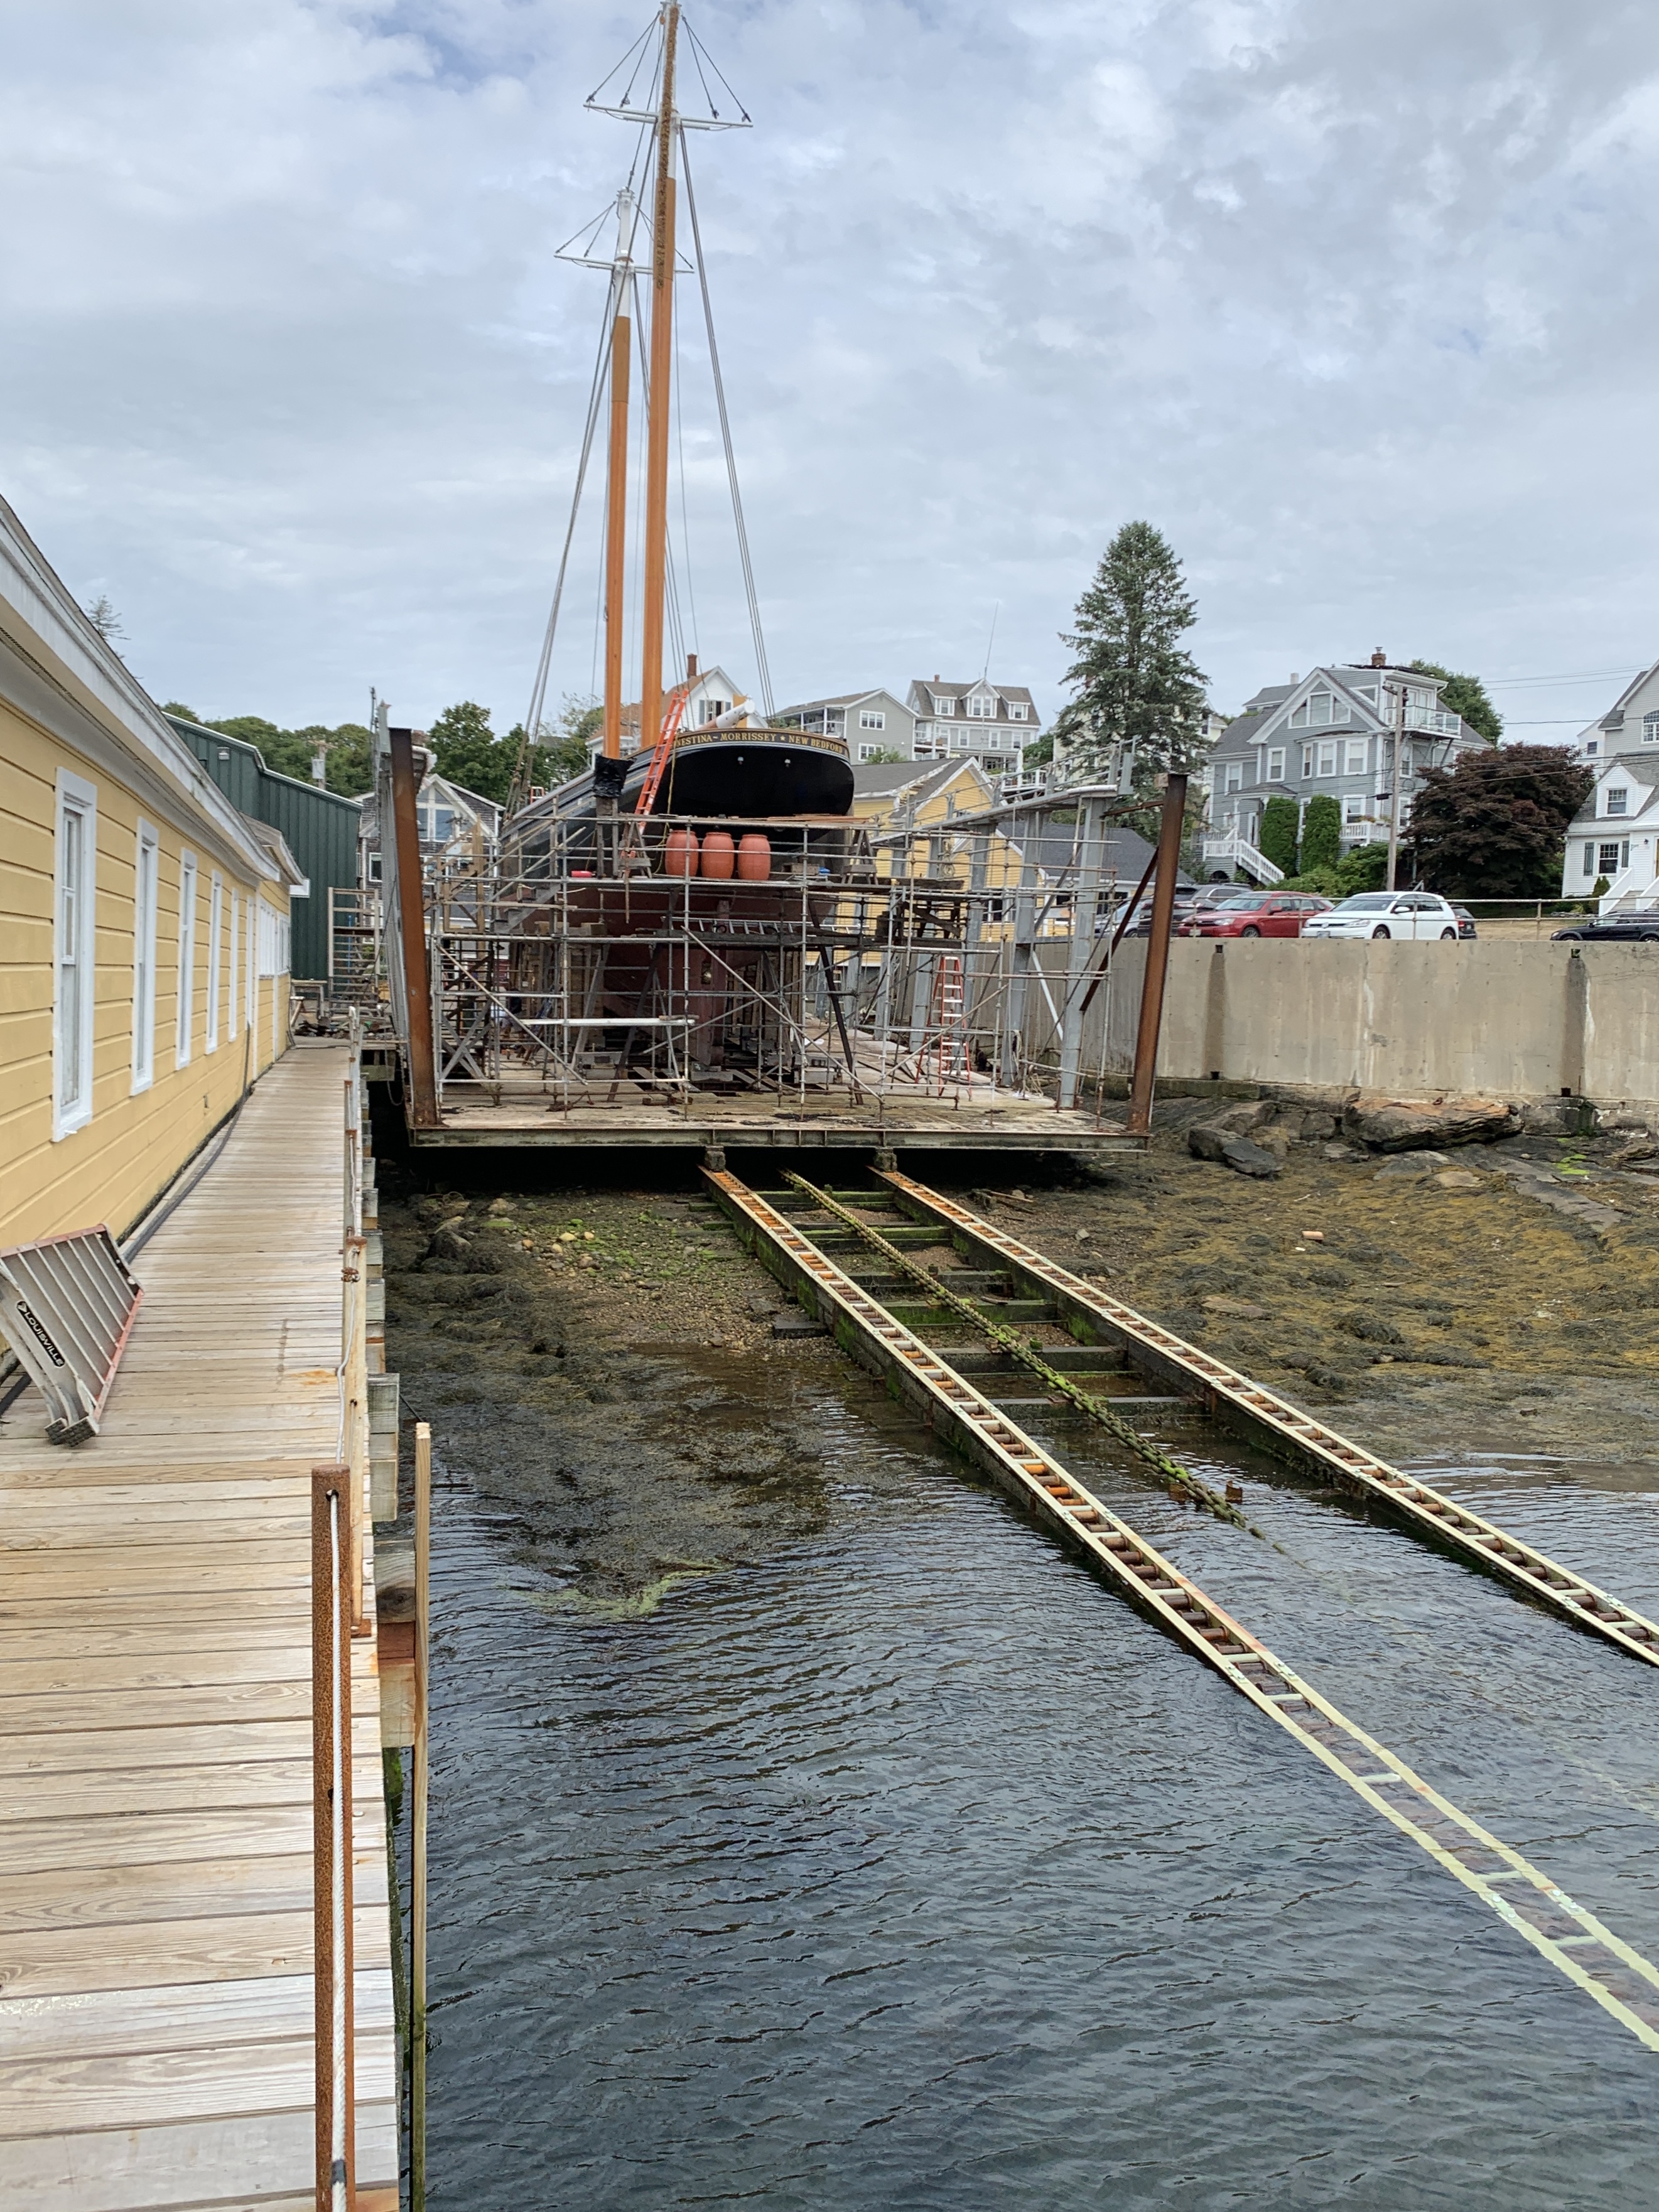 ERnestina-Morrissey will launch stern first. The car will be let down the railway which, during very low tides in early Spring, was been inspected and tuned up n preparation for the launch.